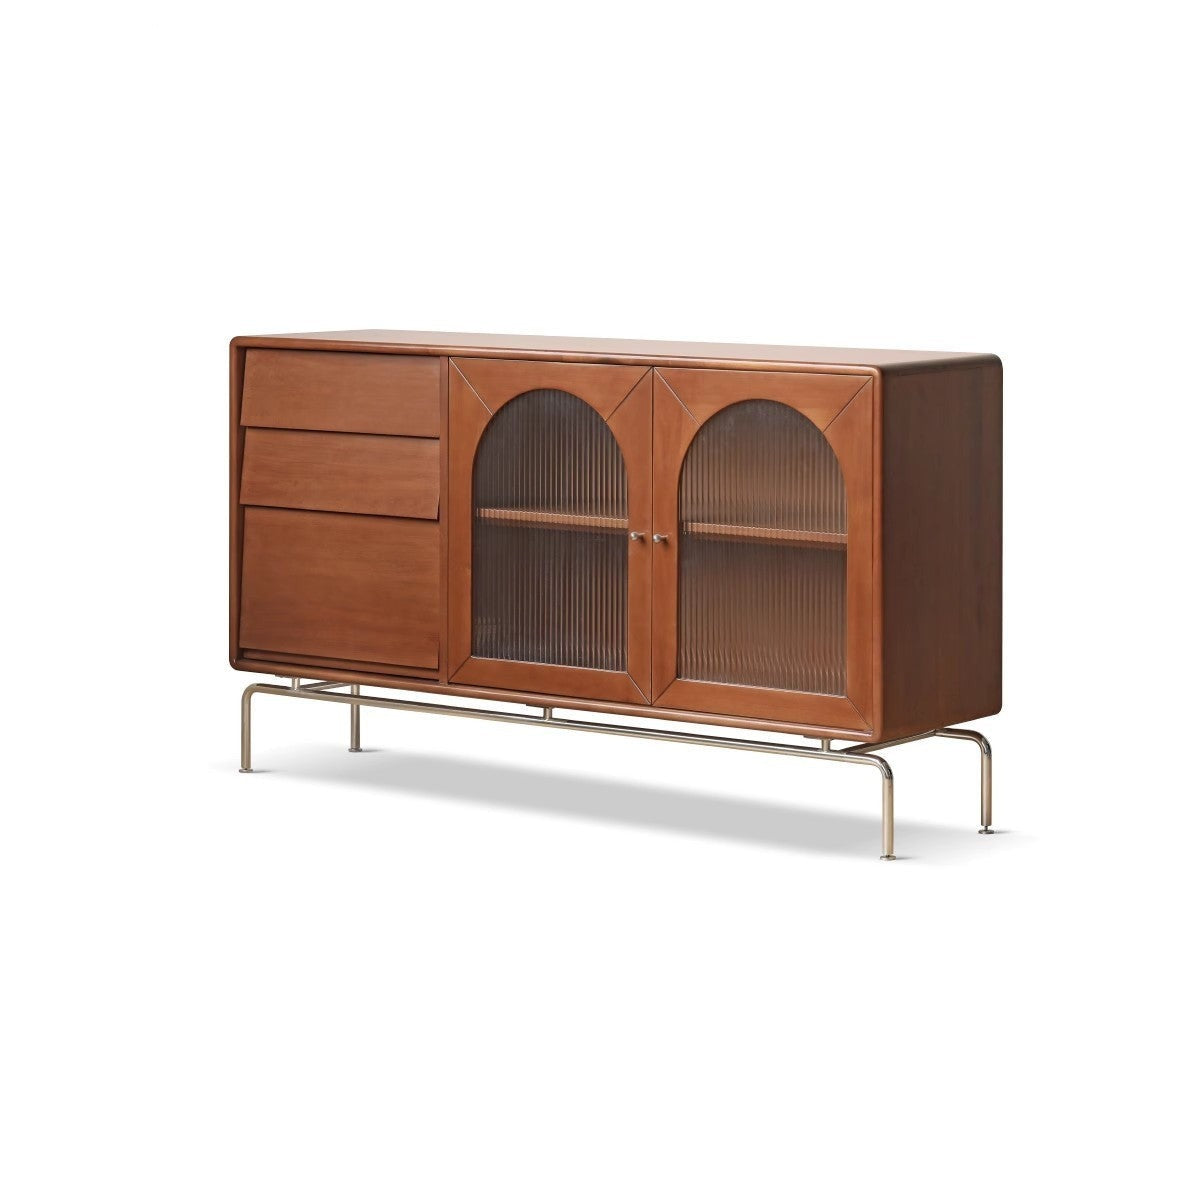 Polar solid wood sideboard French retro glass cabinet "